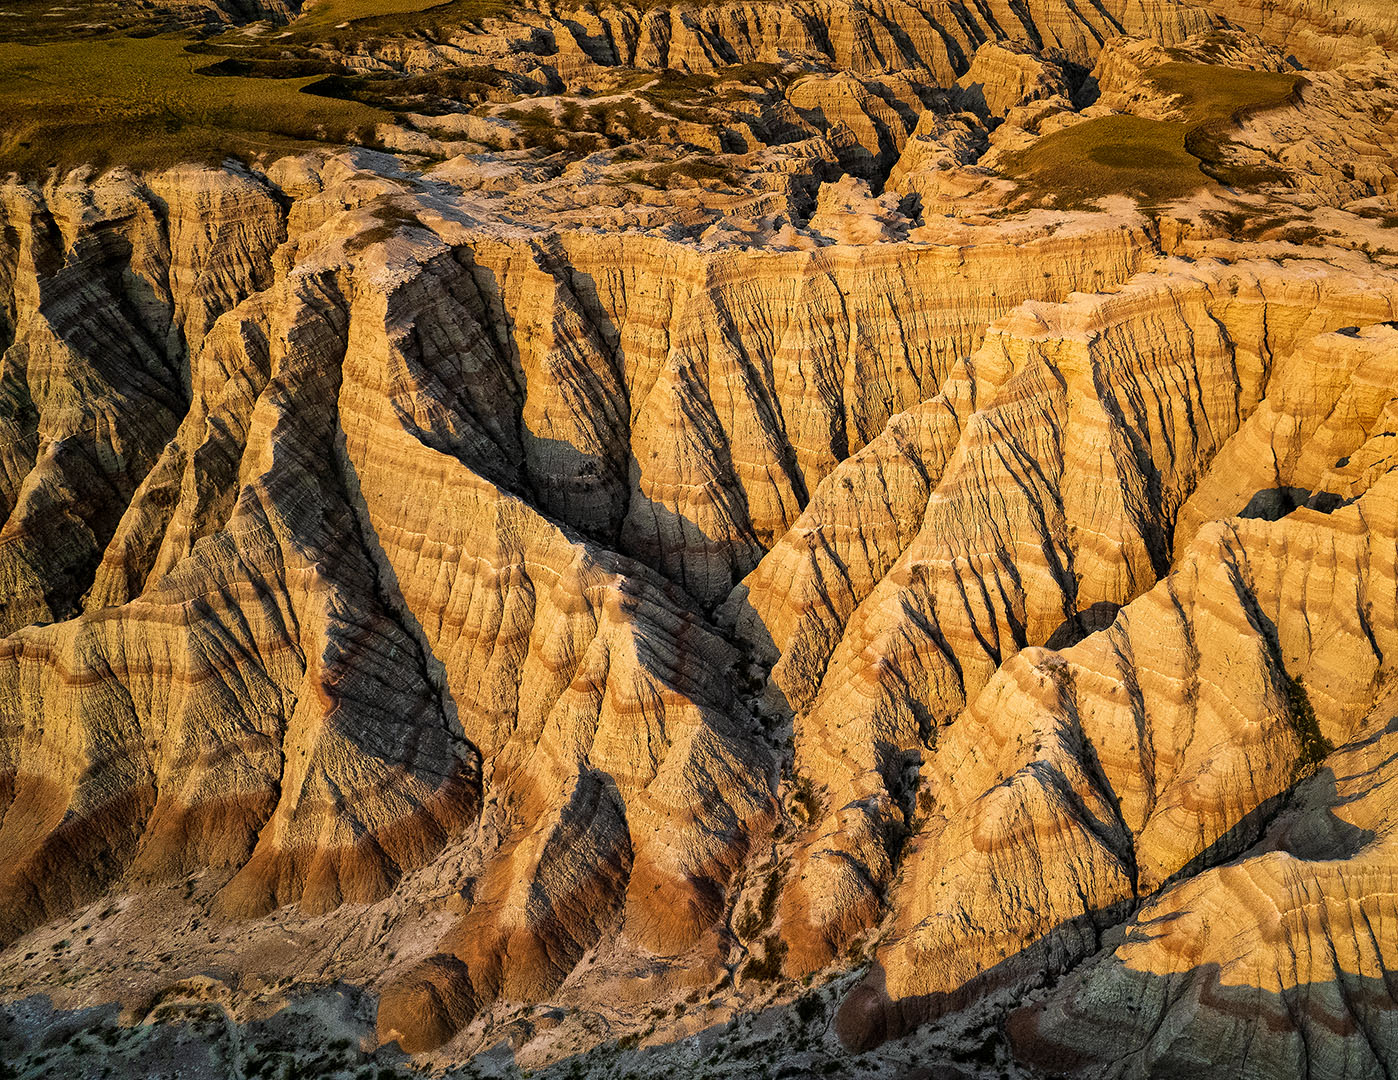 Sunrise in the Badlands by Pete Scifres, GPSA